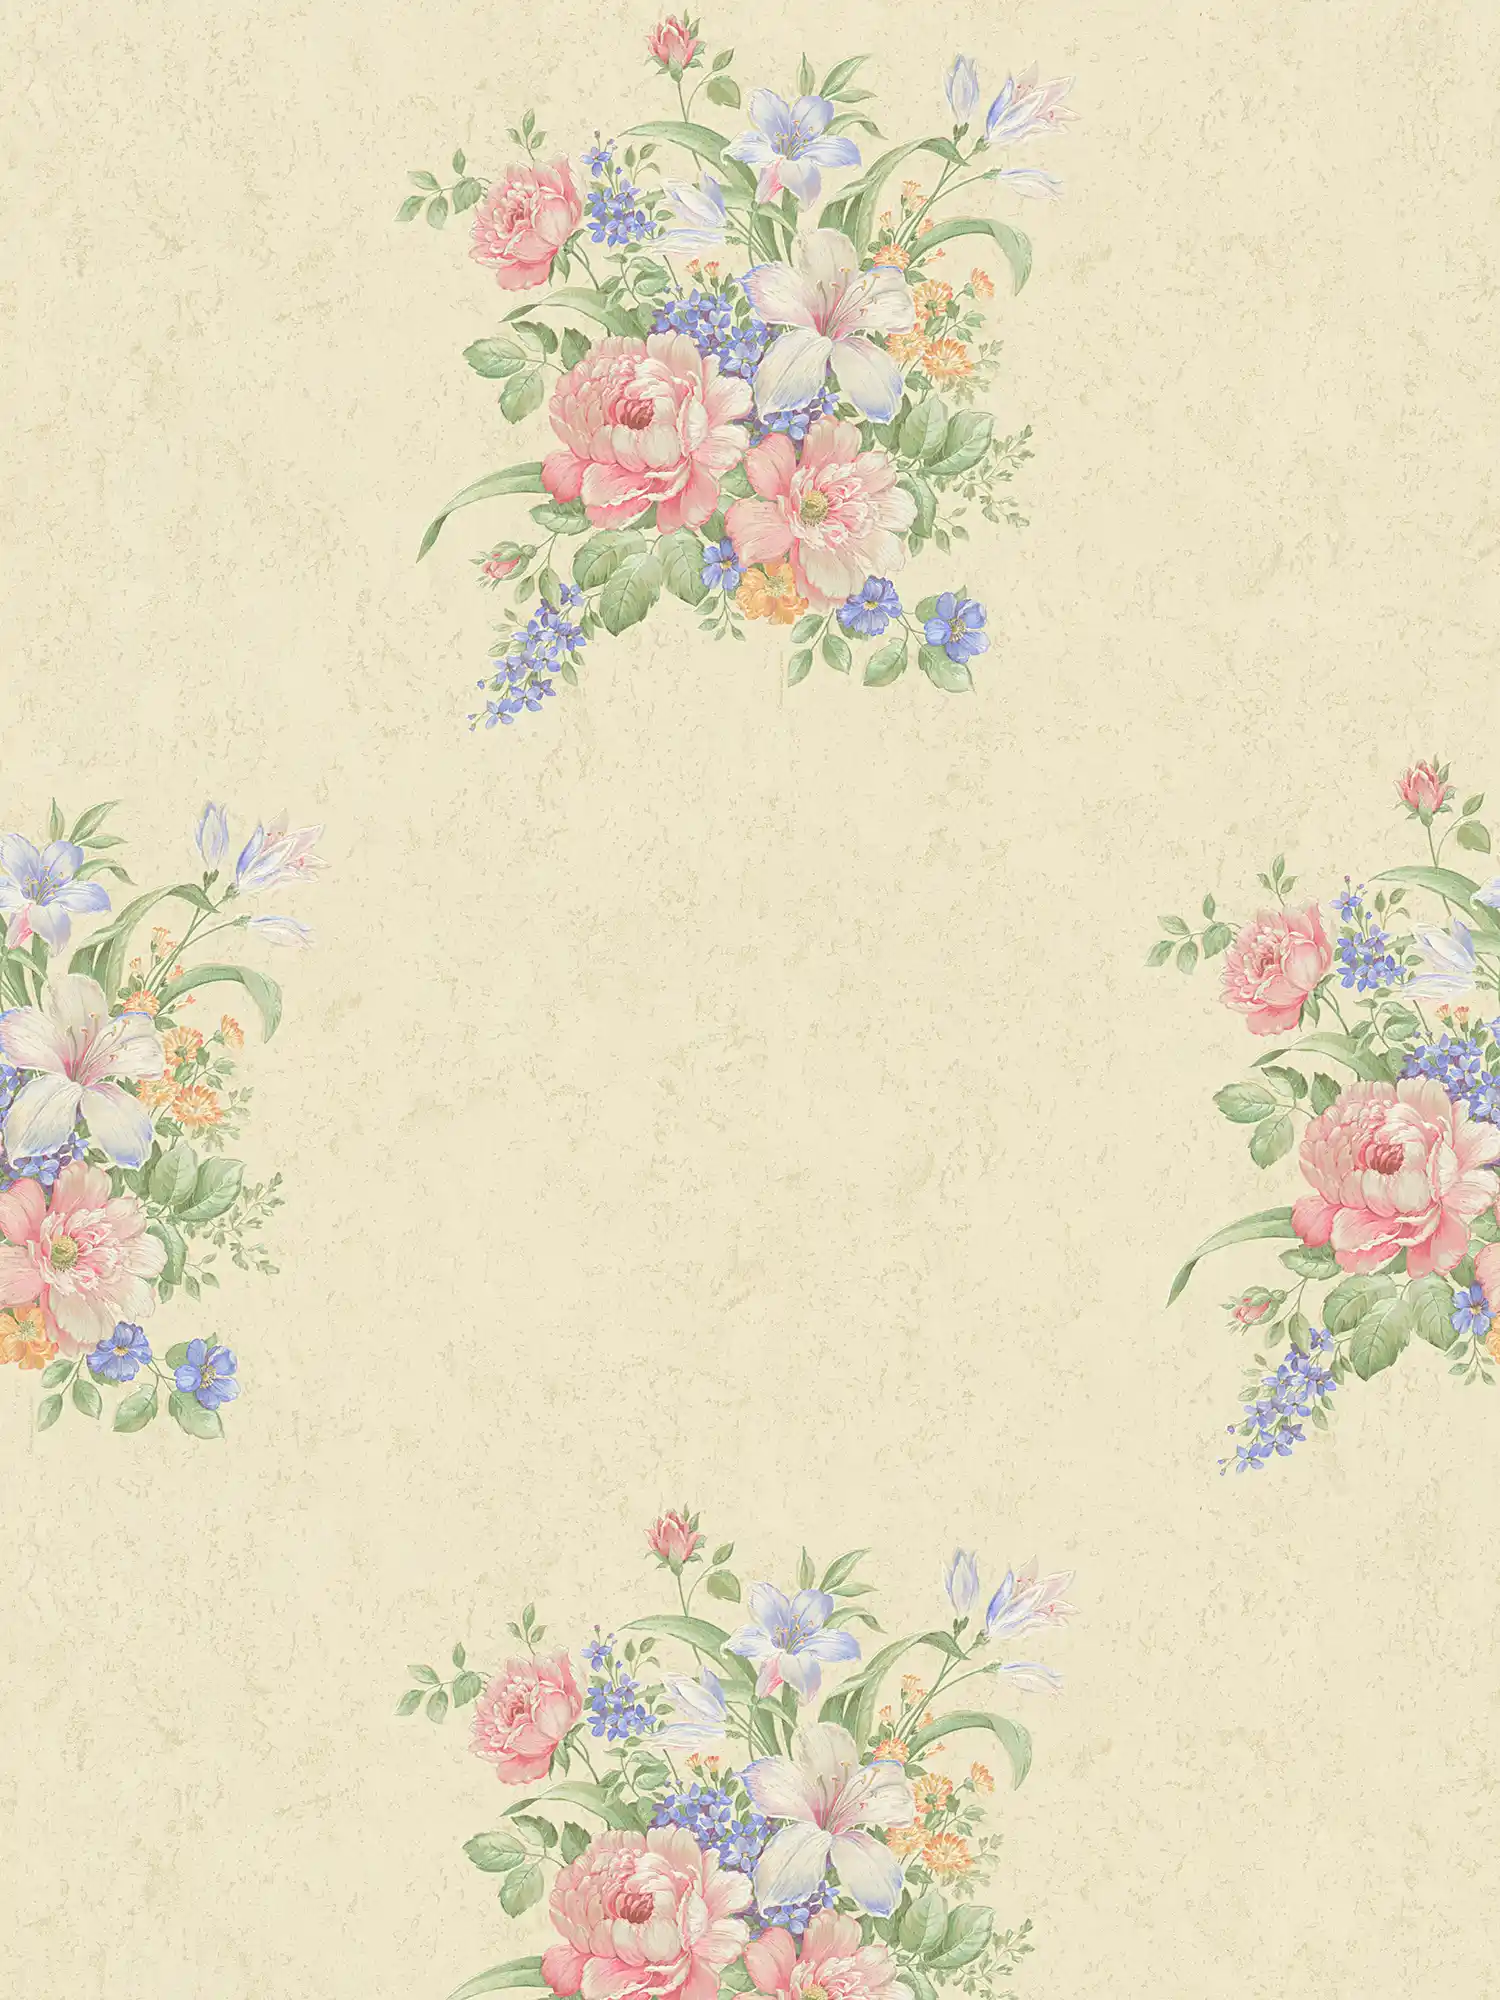 Non-woven wallpaper floral ornaments & textured pattern - cream, green, pink
